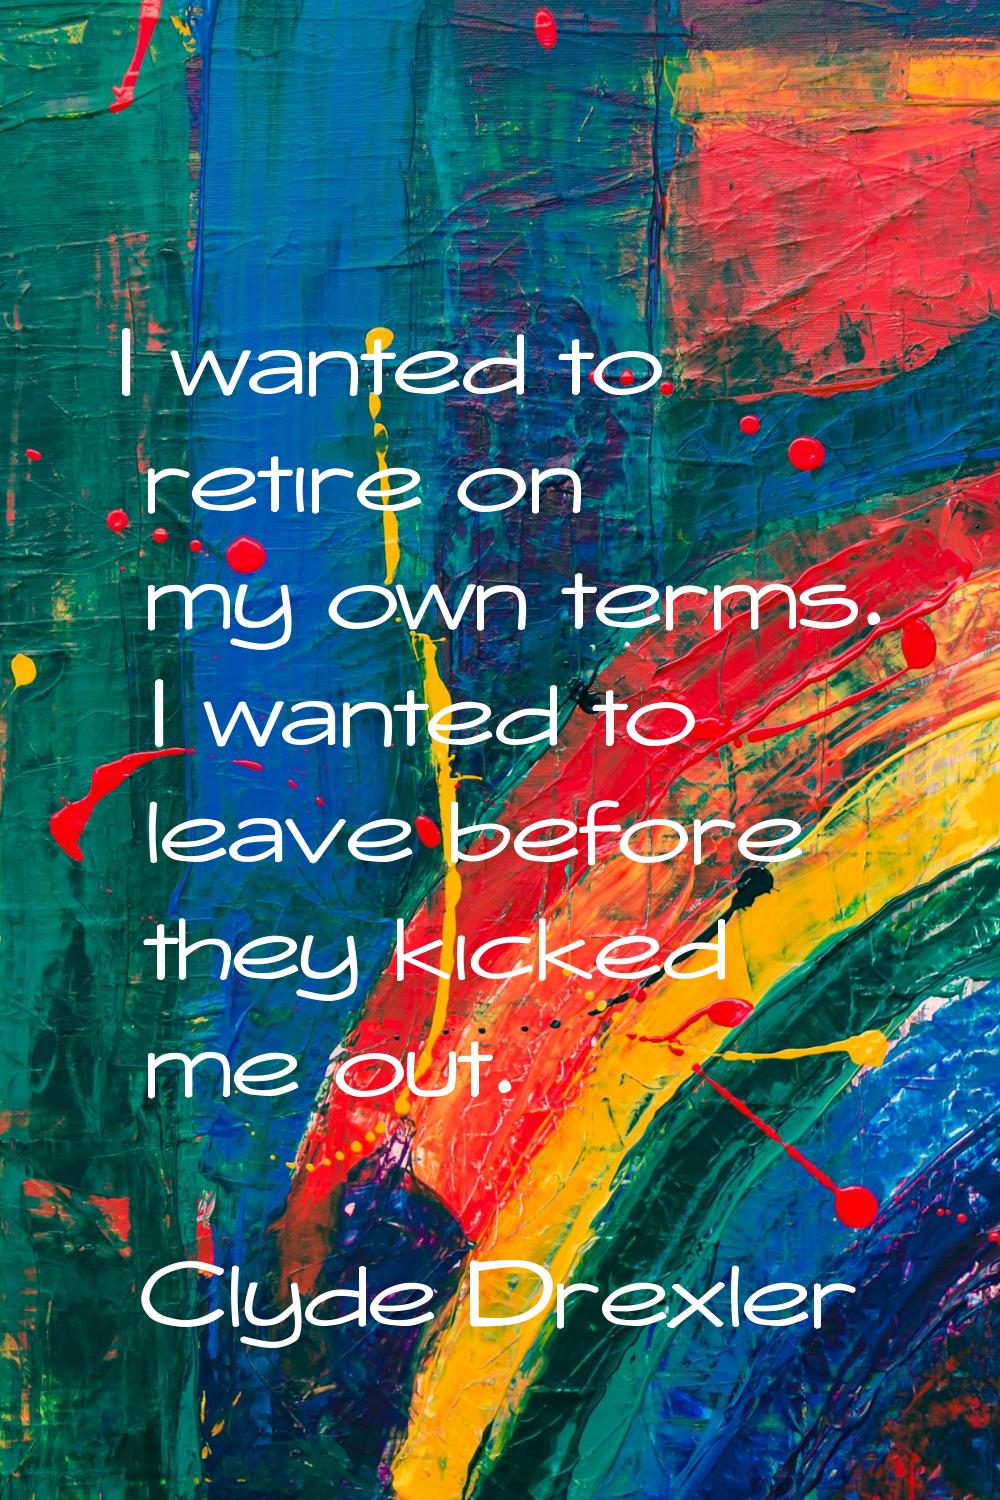 I wanted to retire on my own terms. I wanted to leave before they kicked me out.